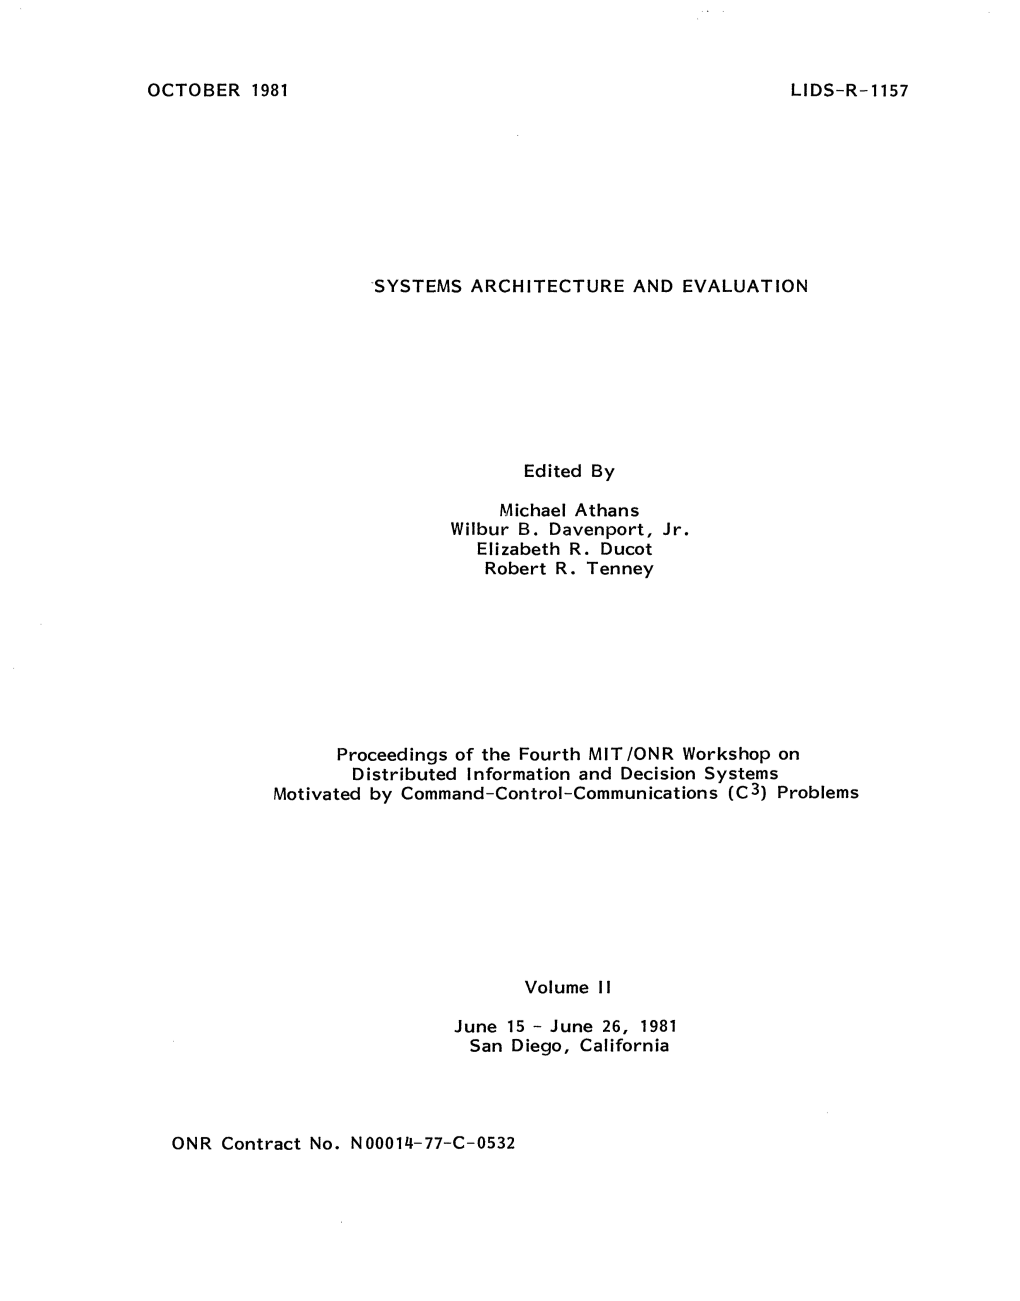 SYSTEMS ARCHITECTURE and EVALUATION Edited by Michael